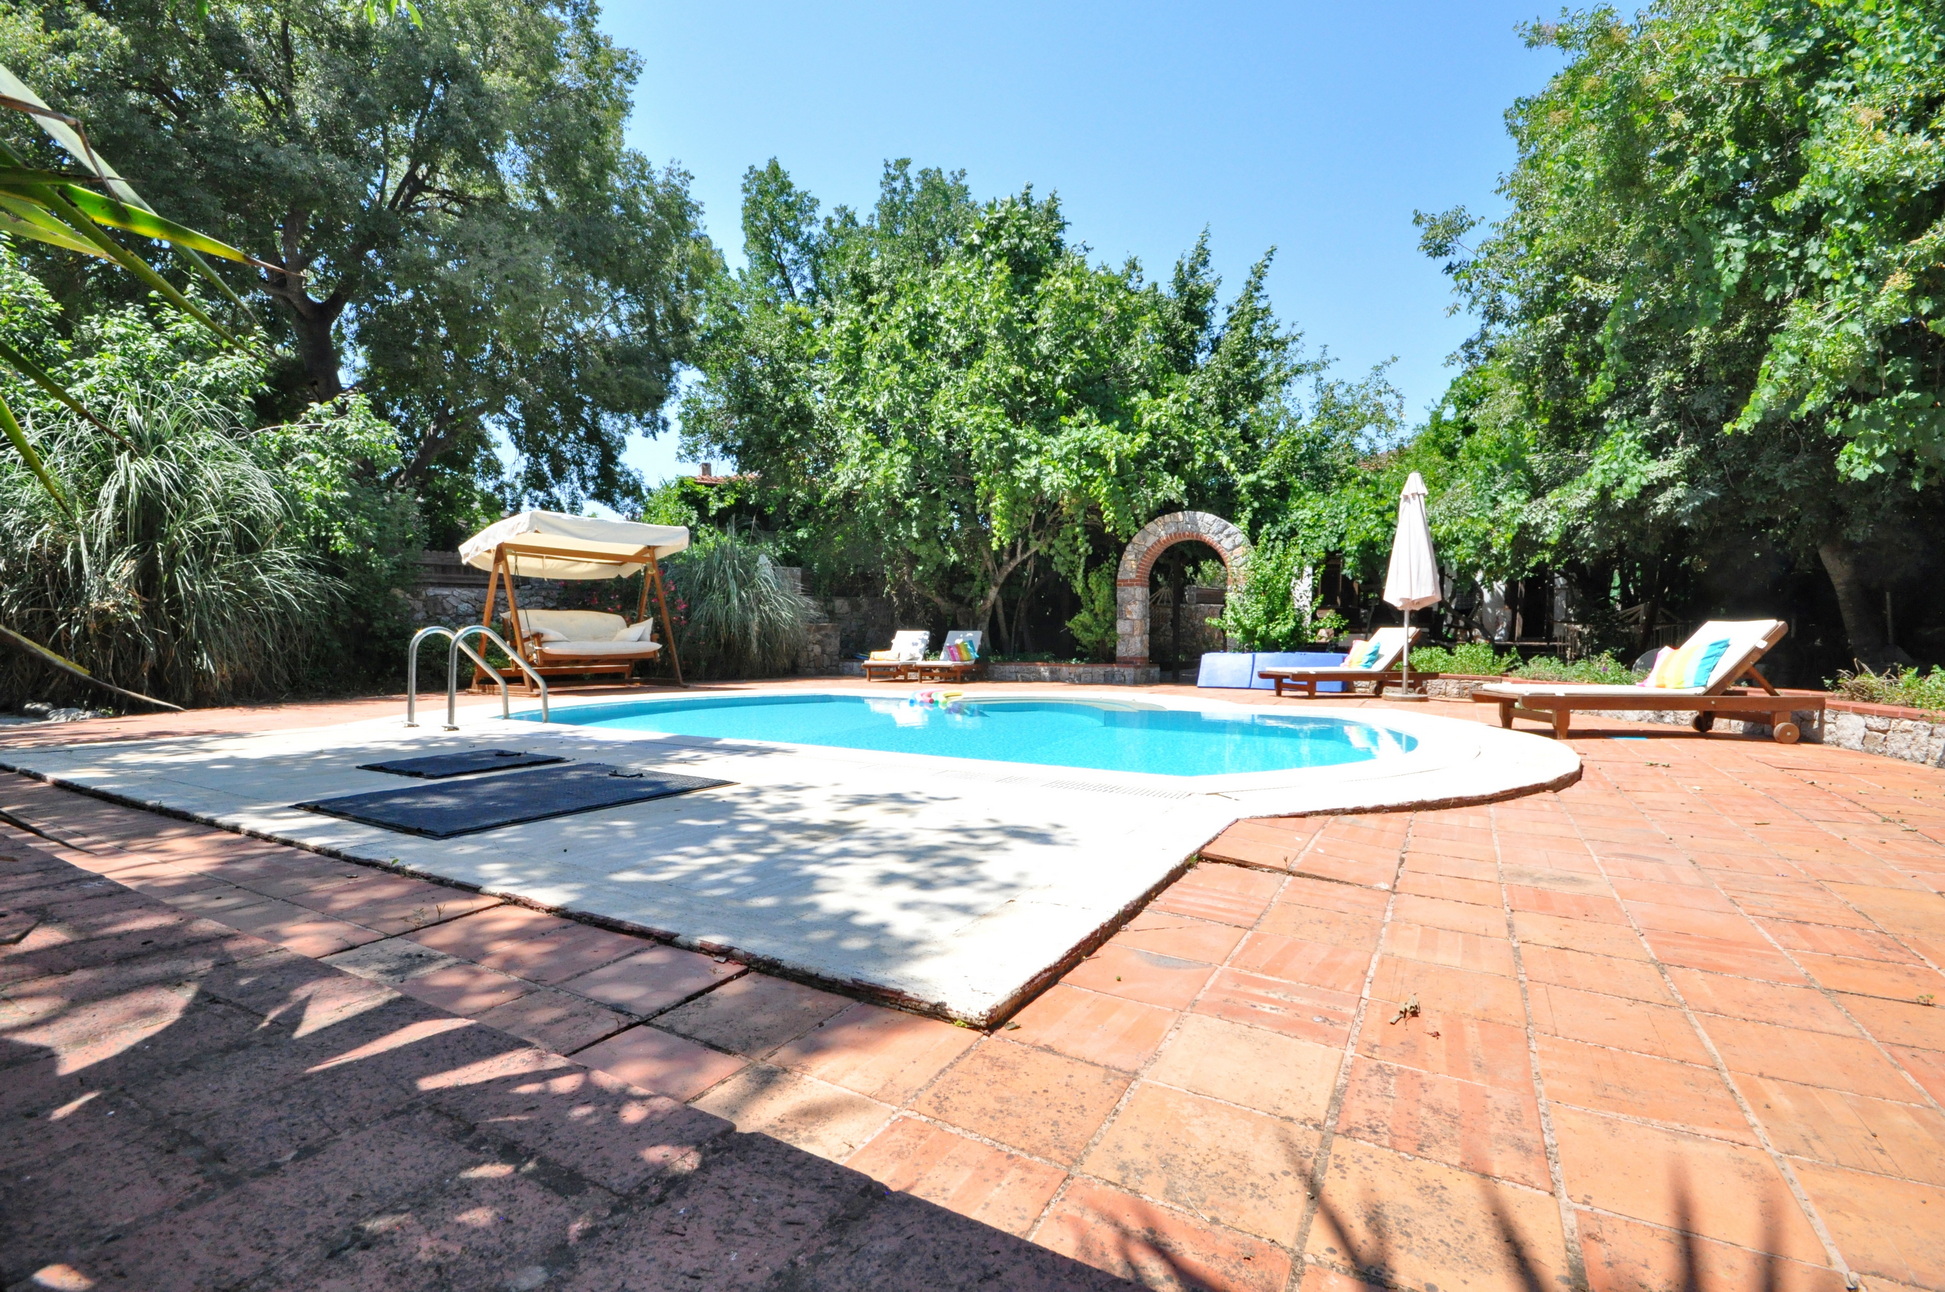 Spectacular 3 Bedroom Stone House with Private Pool and Mature Garden in Kayakoy